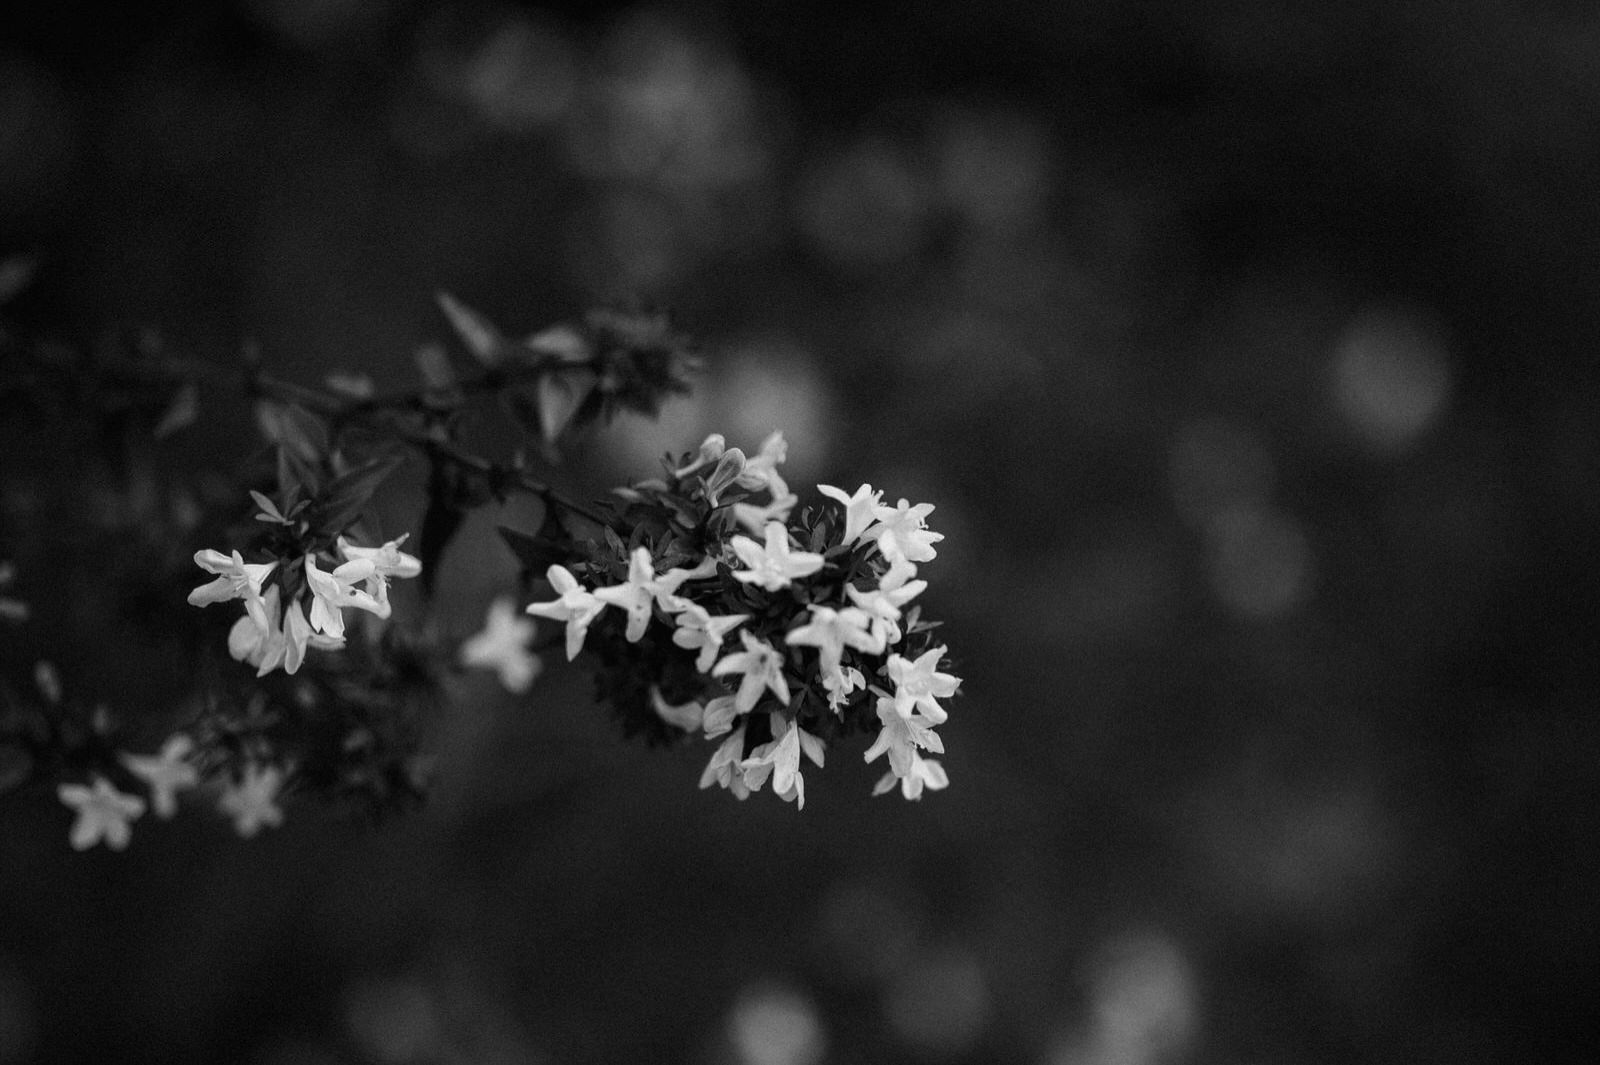 detail of flowers in black and white